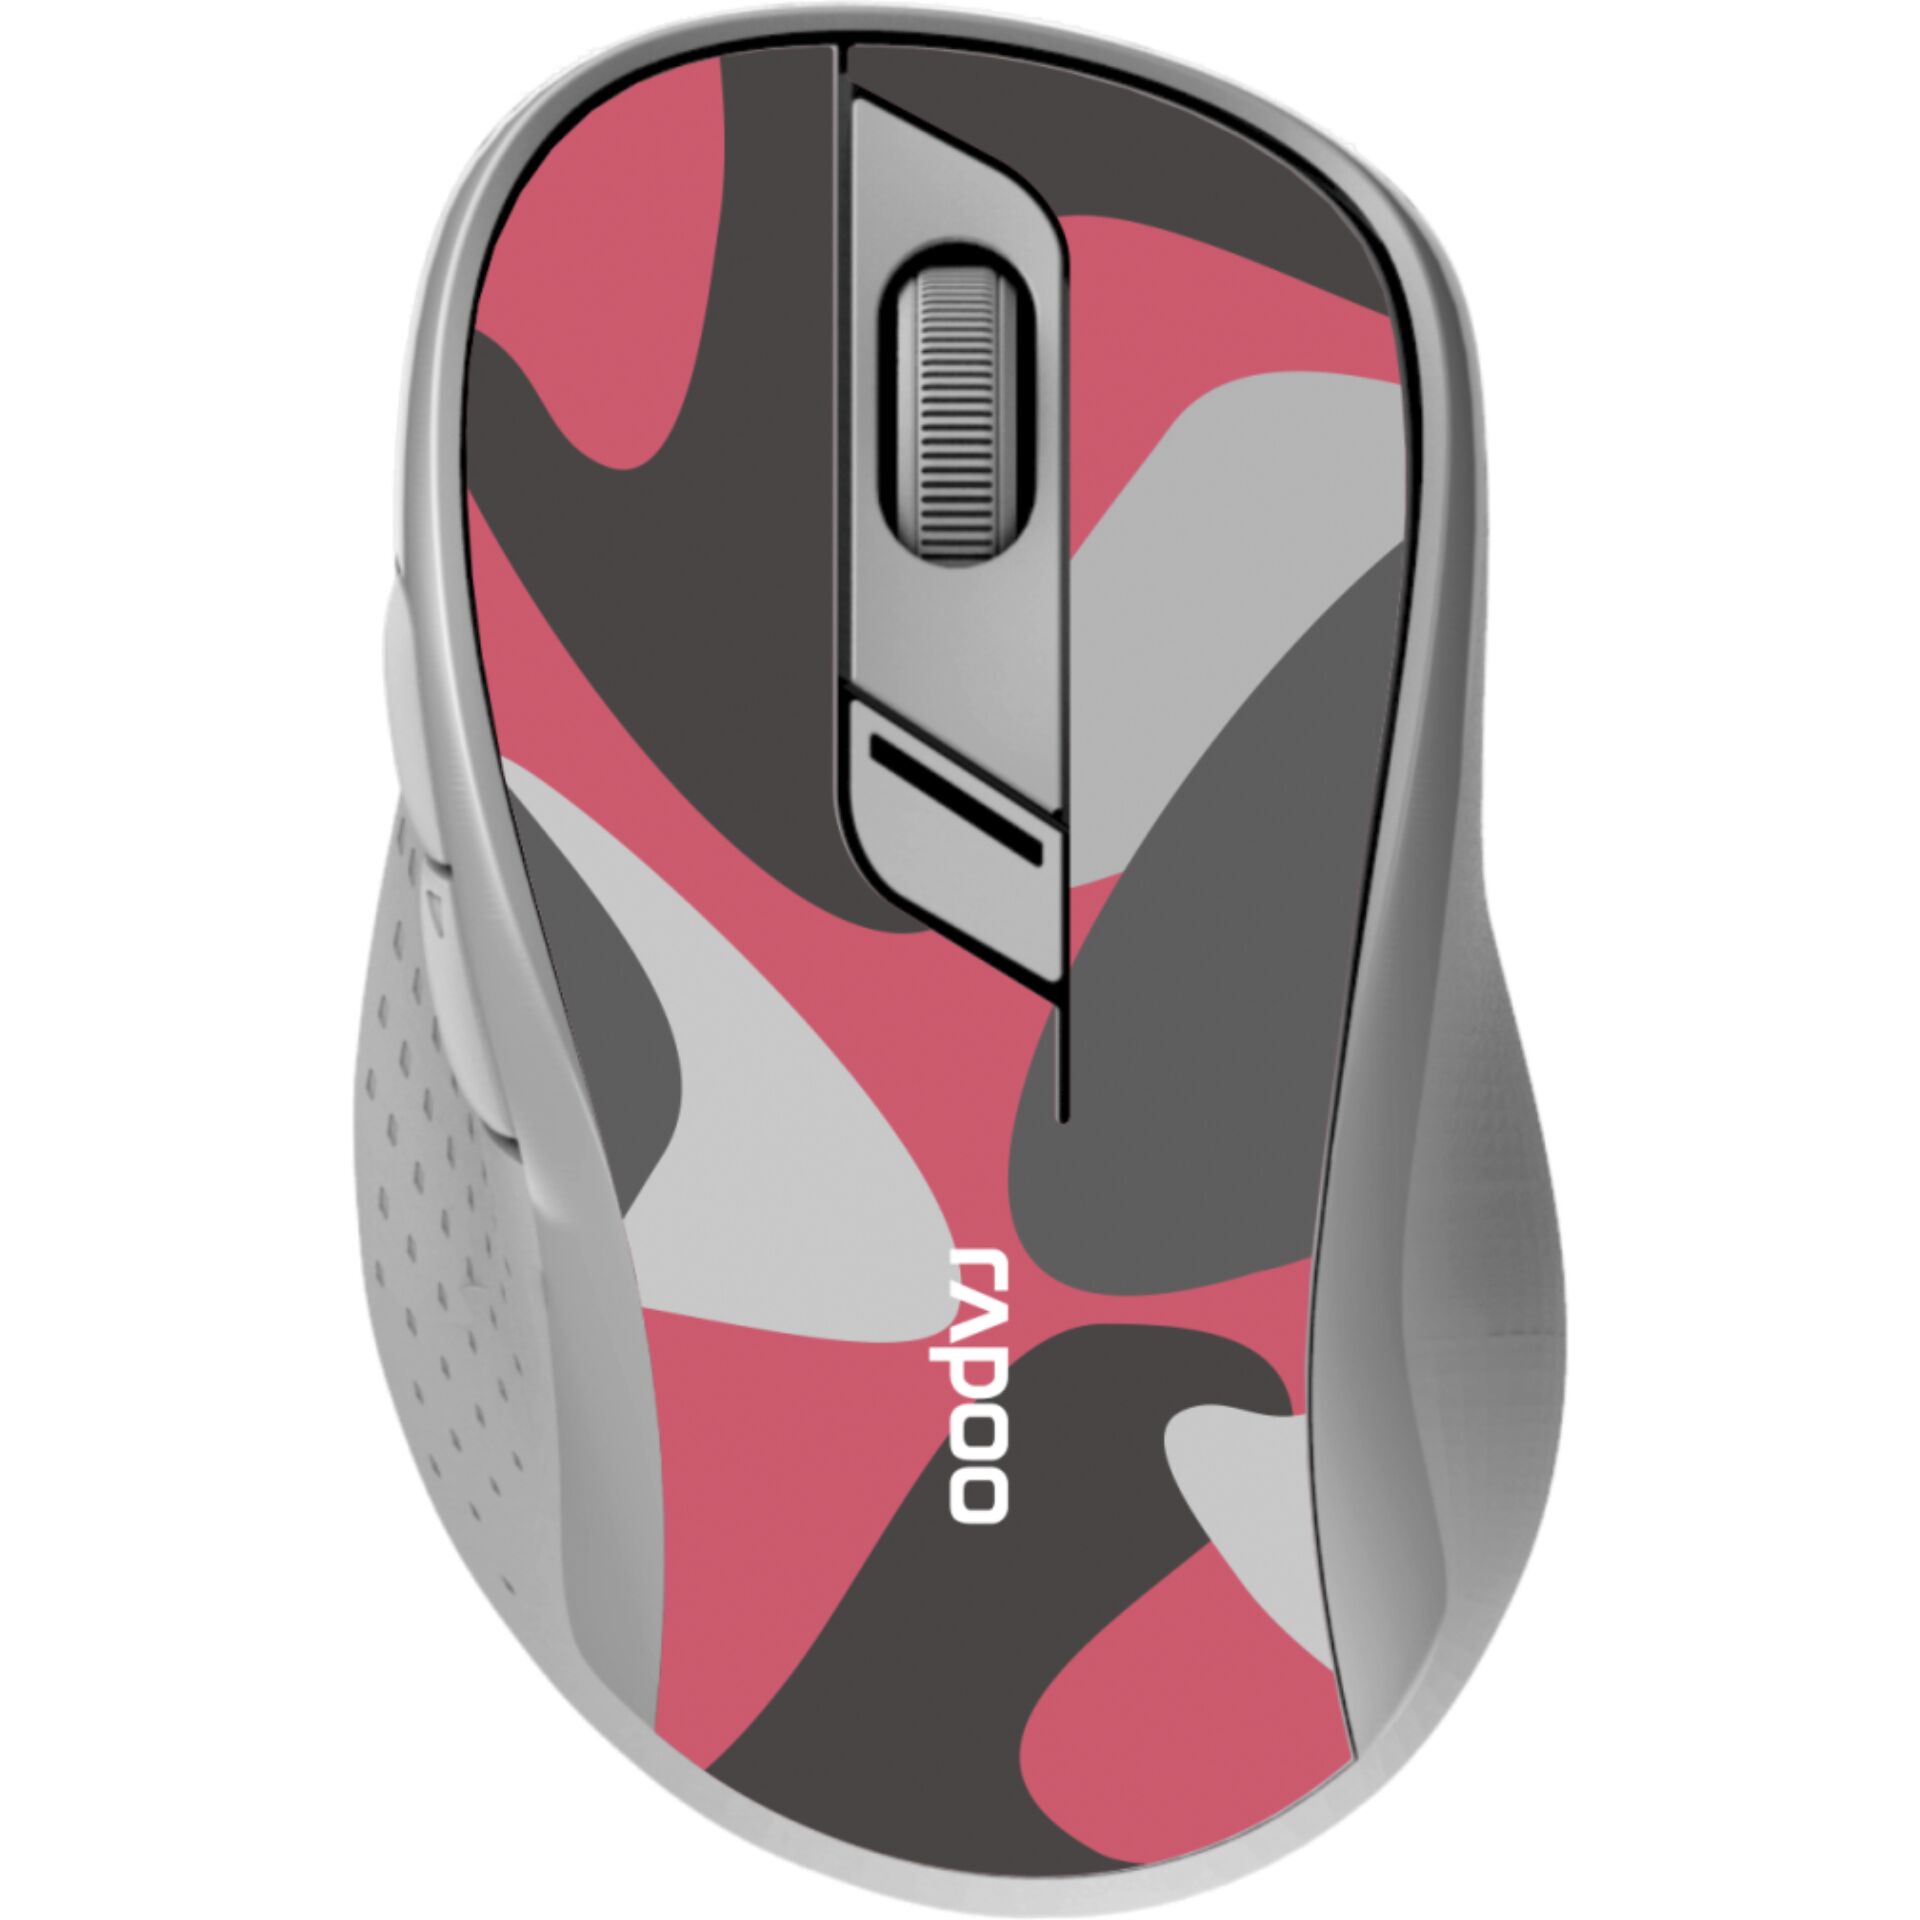 Rapoo M500 Multi-Mode Wireless Mouse Camouflage/Red